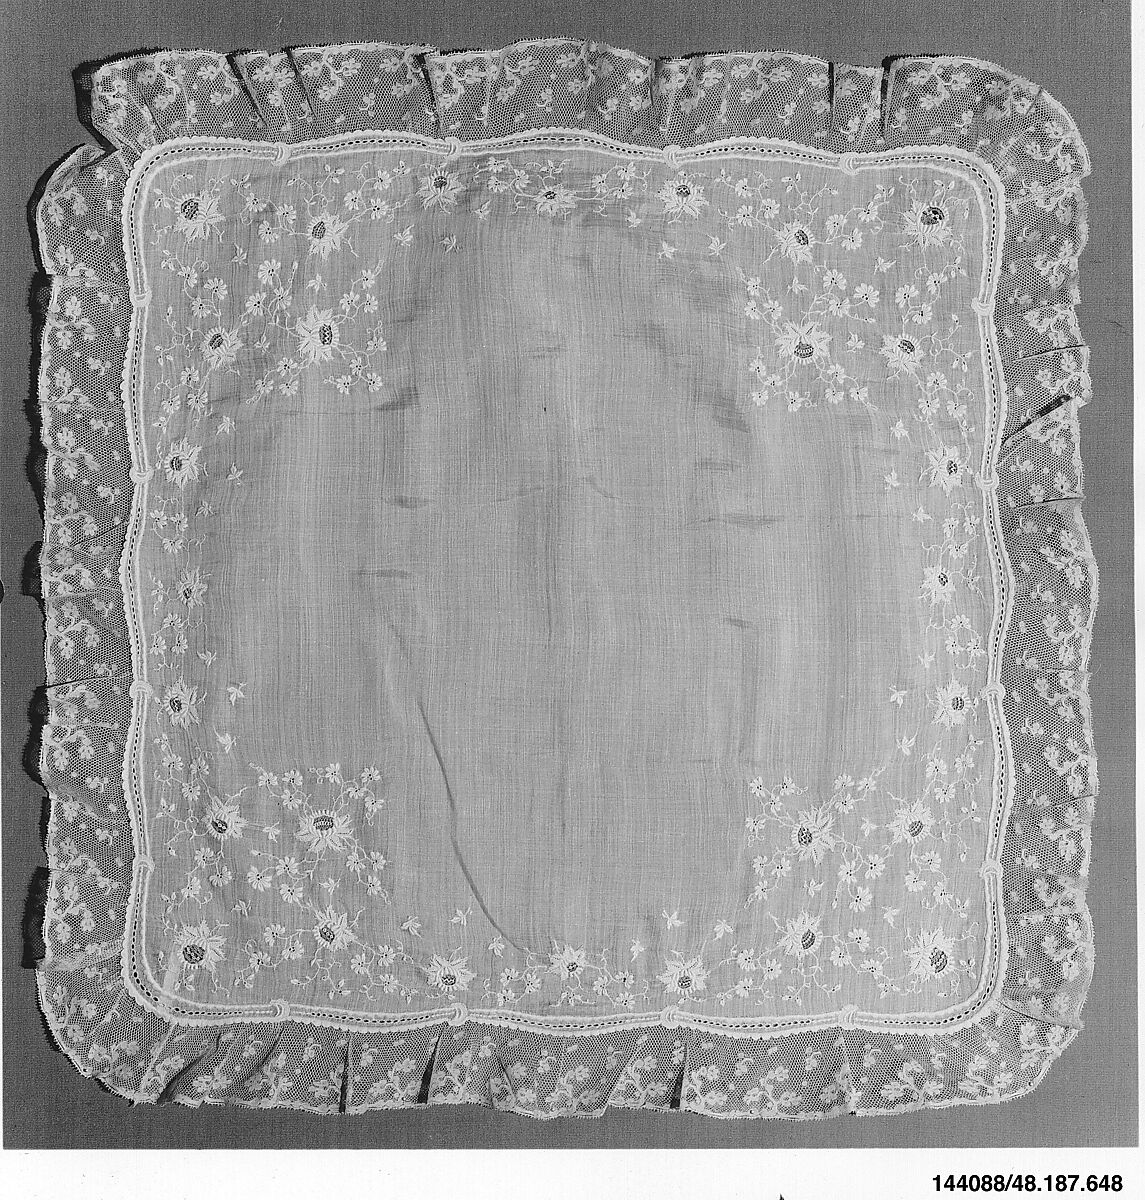 Handkerchief, Linen and lace, French 